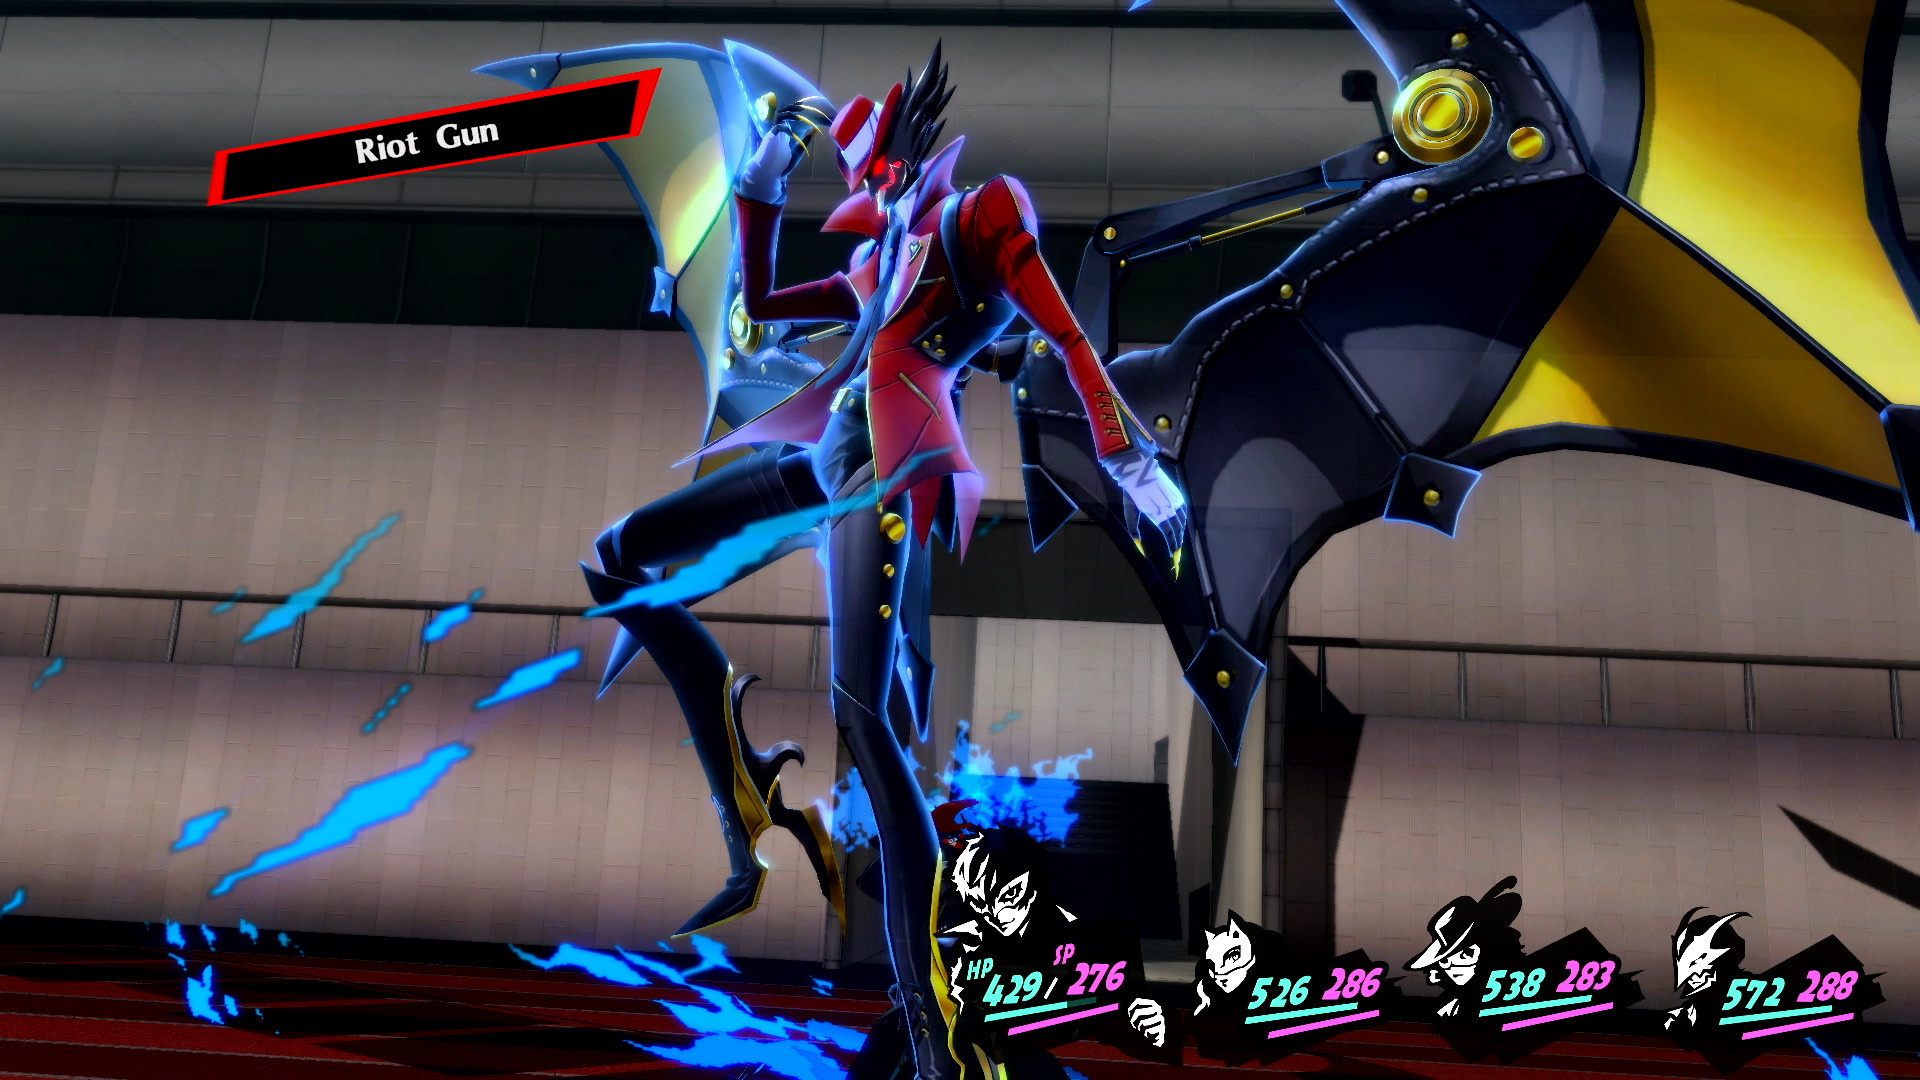 Persona 5 Royal Review Thread